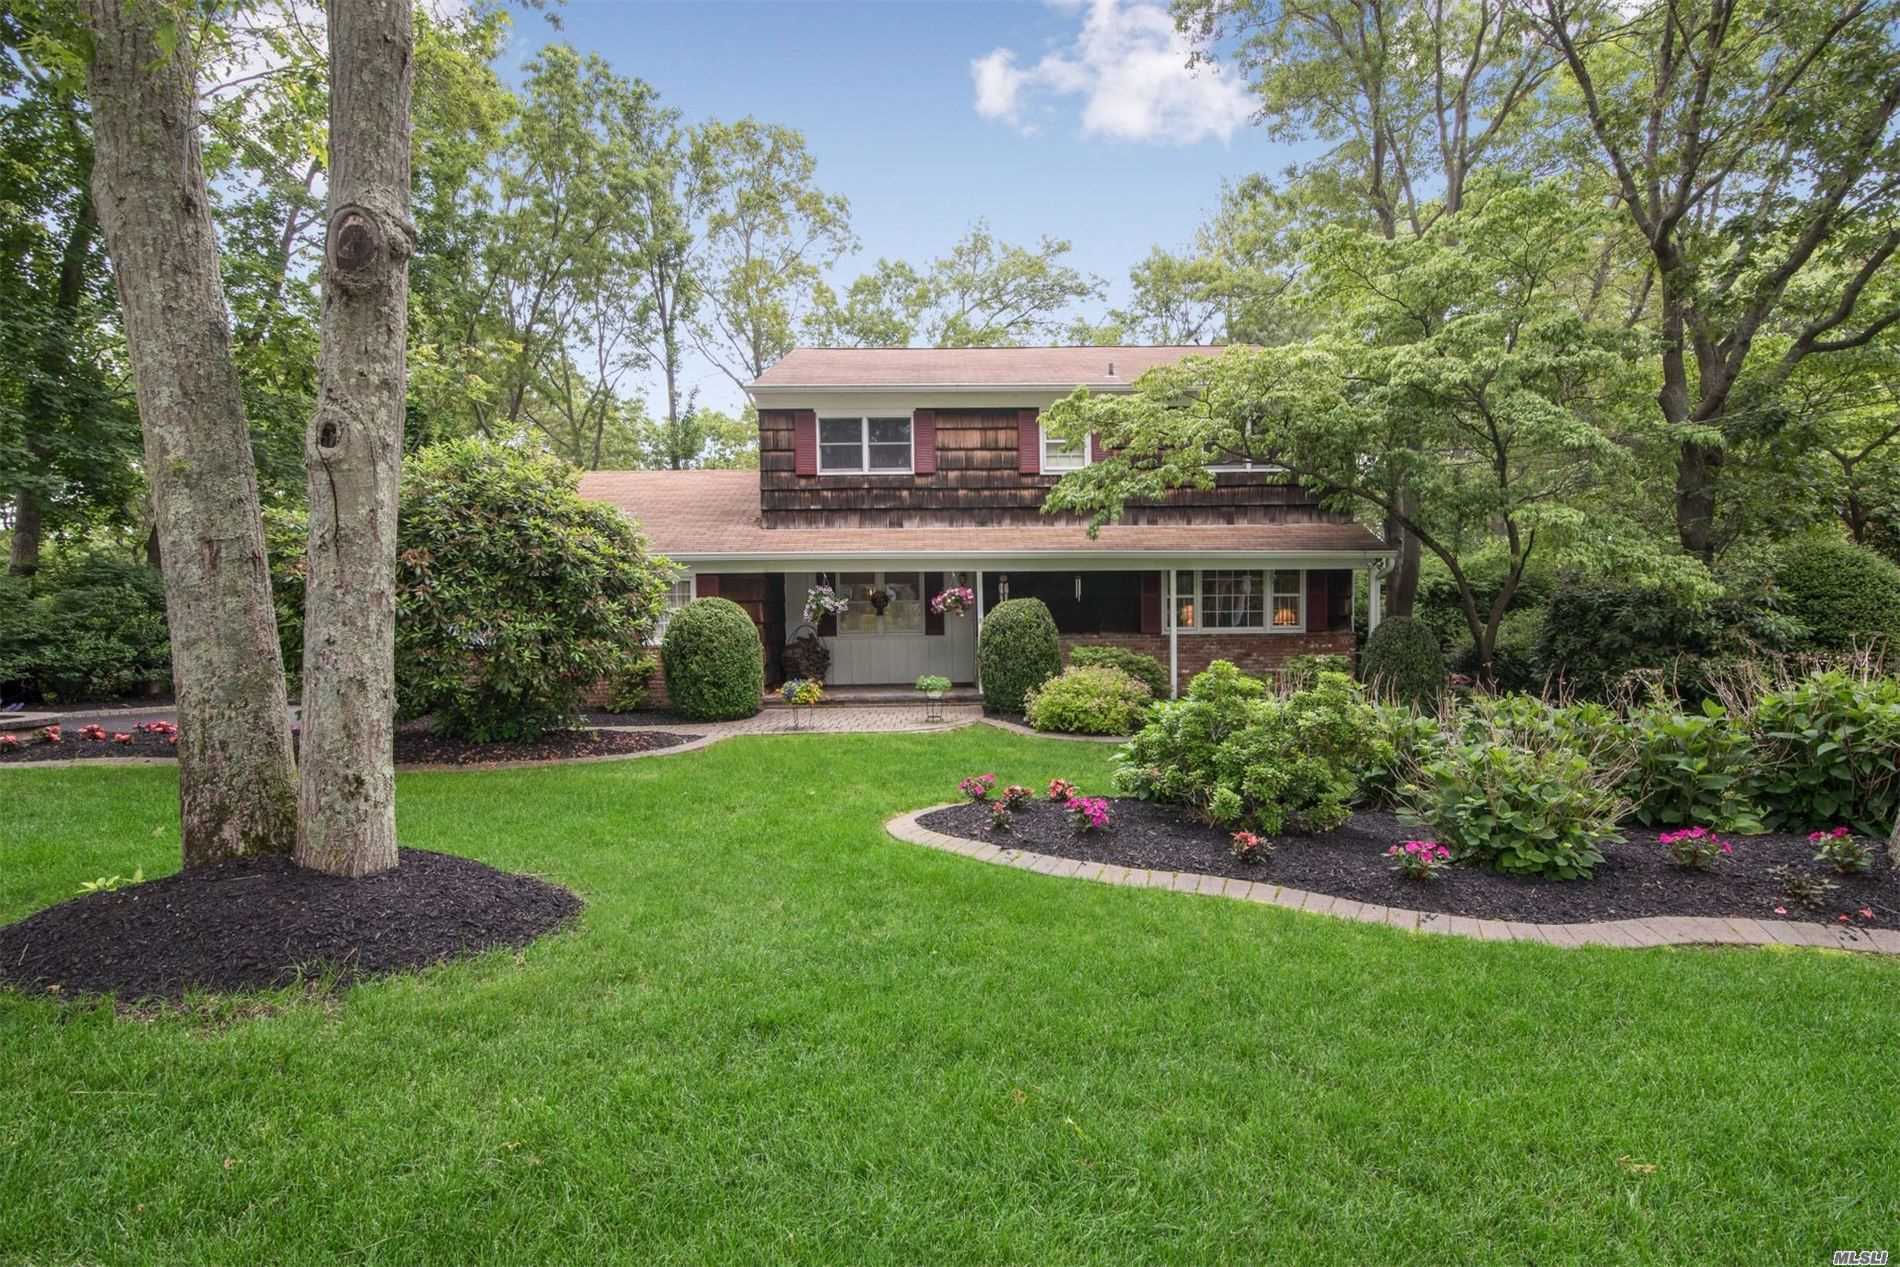 Must See! Nestled on over .5 acre on cul-de-sac in the heart of the Three Village Community. Minutes to beach, shopping and SBU. Immaculate colonial offers lots of room inside and out! 1st Floor: LR, FDR, Large EIK, Den w/Fpl, Study, Laundry 1/2 Bath, 2nd floor Features Expansive Master Suite w/pvt Bath and Walk-in Closet, plus 3 Bedrooms, Hall Bath. Private fenced yard w/in-ground pool. Wood Floors (under carpet), Central A.C., 2 Car Attached Garage